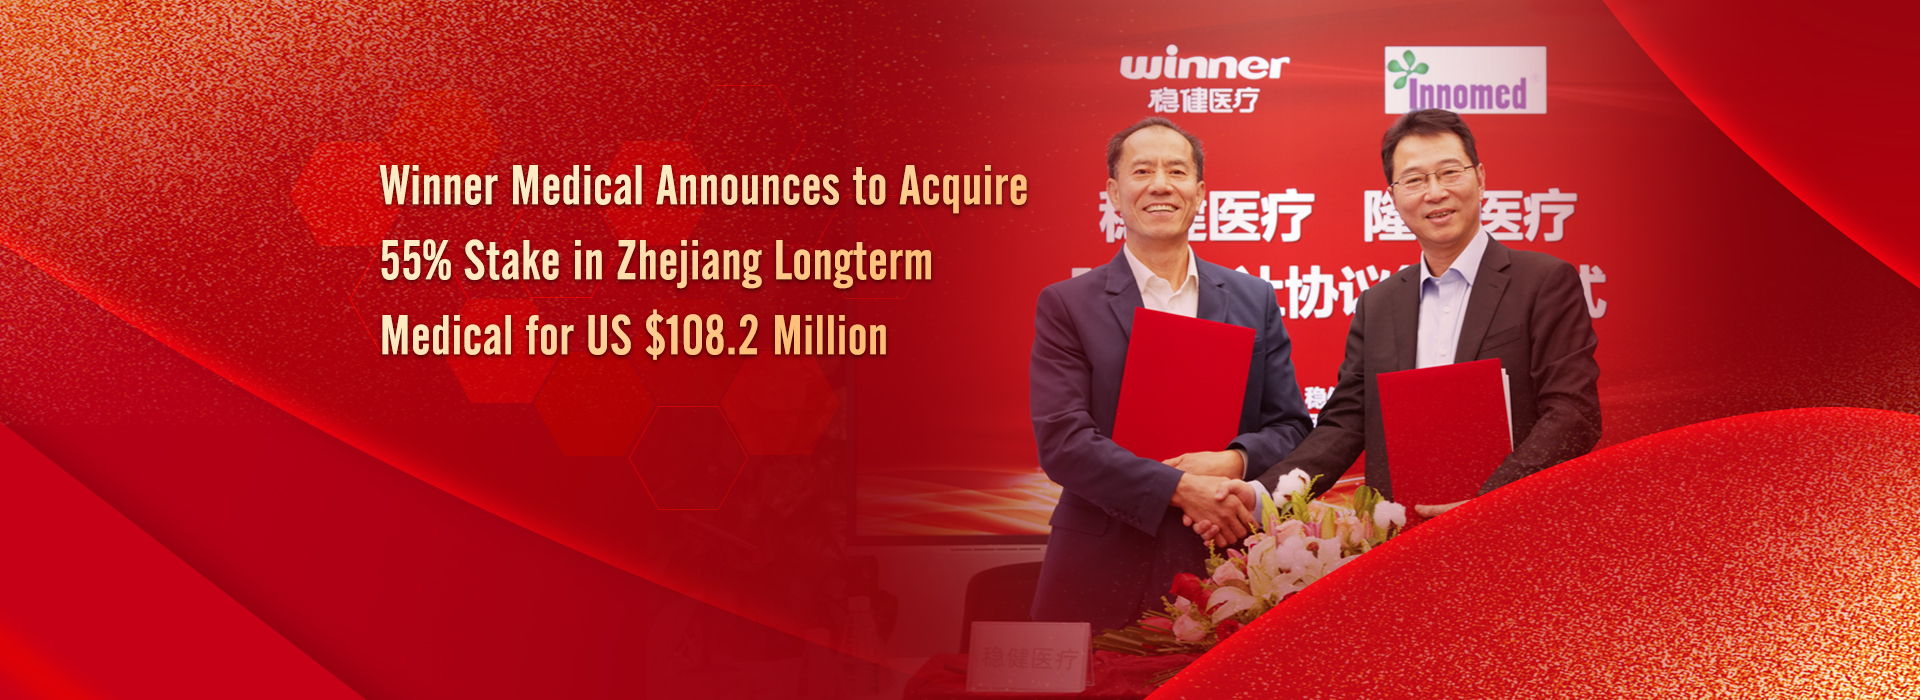 Winner Medical Announces to Acquire 55% Stake in Zhejiang Longterm Medical for US $108.2 Million